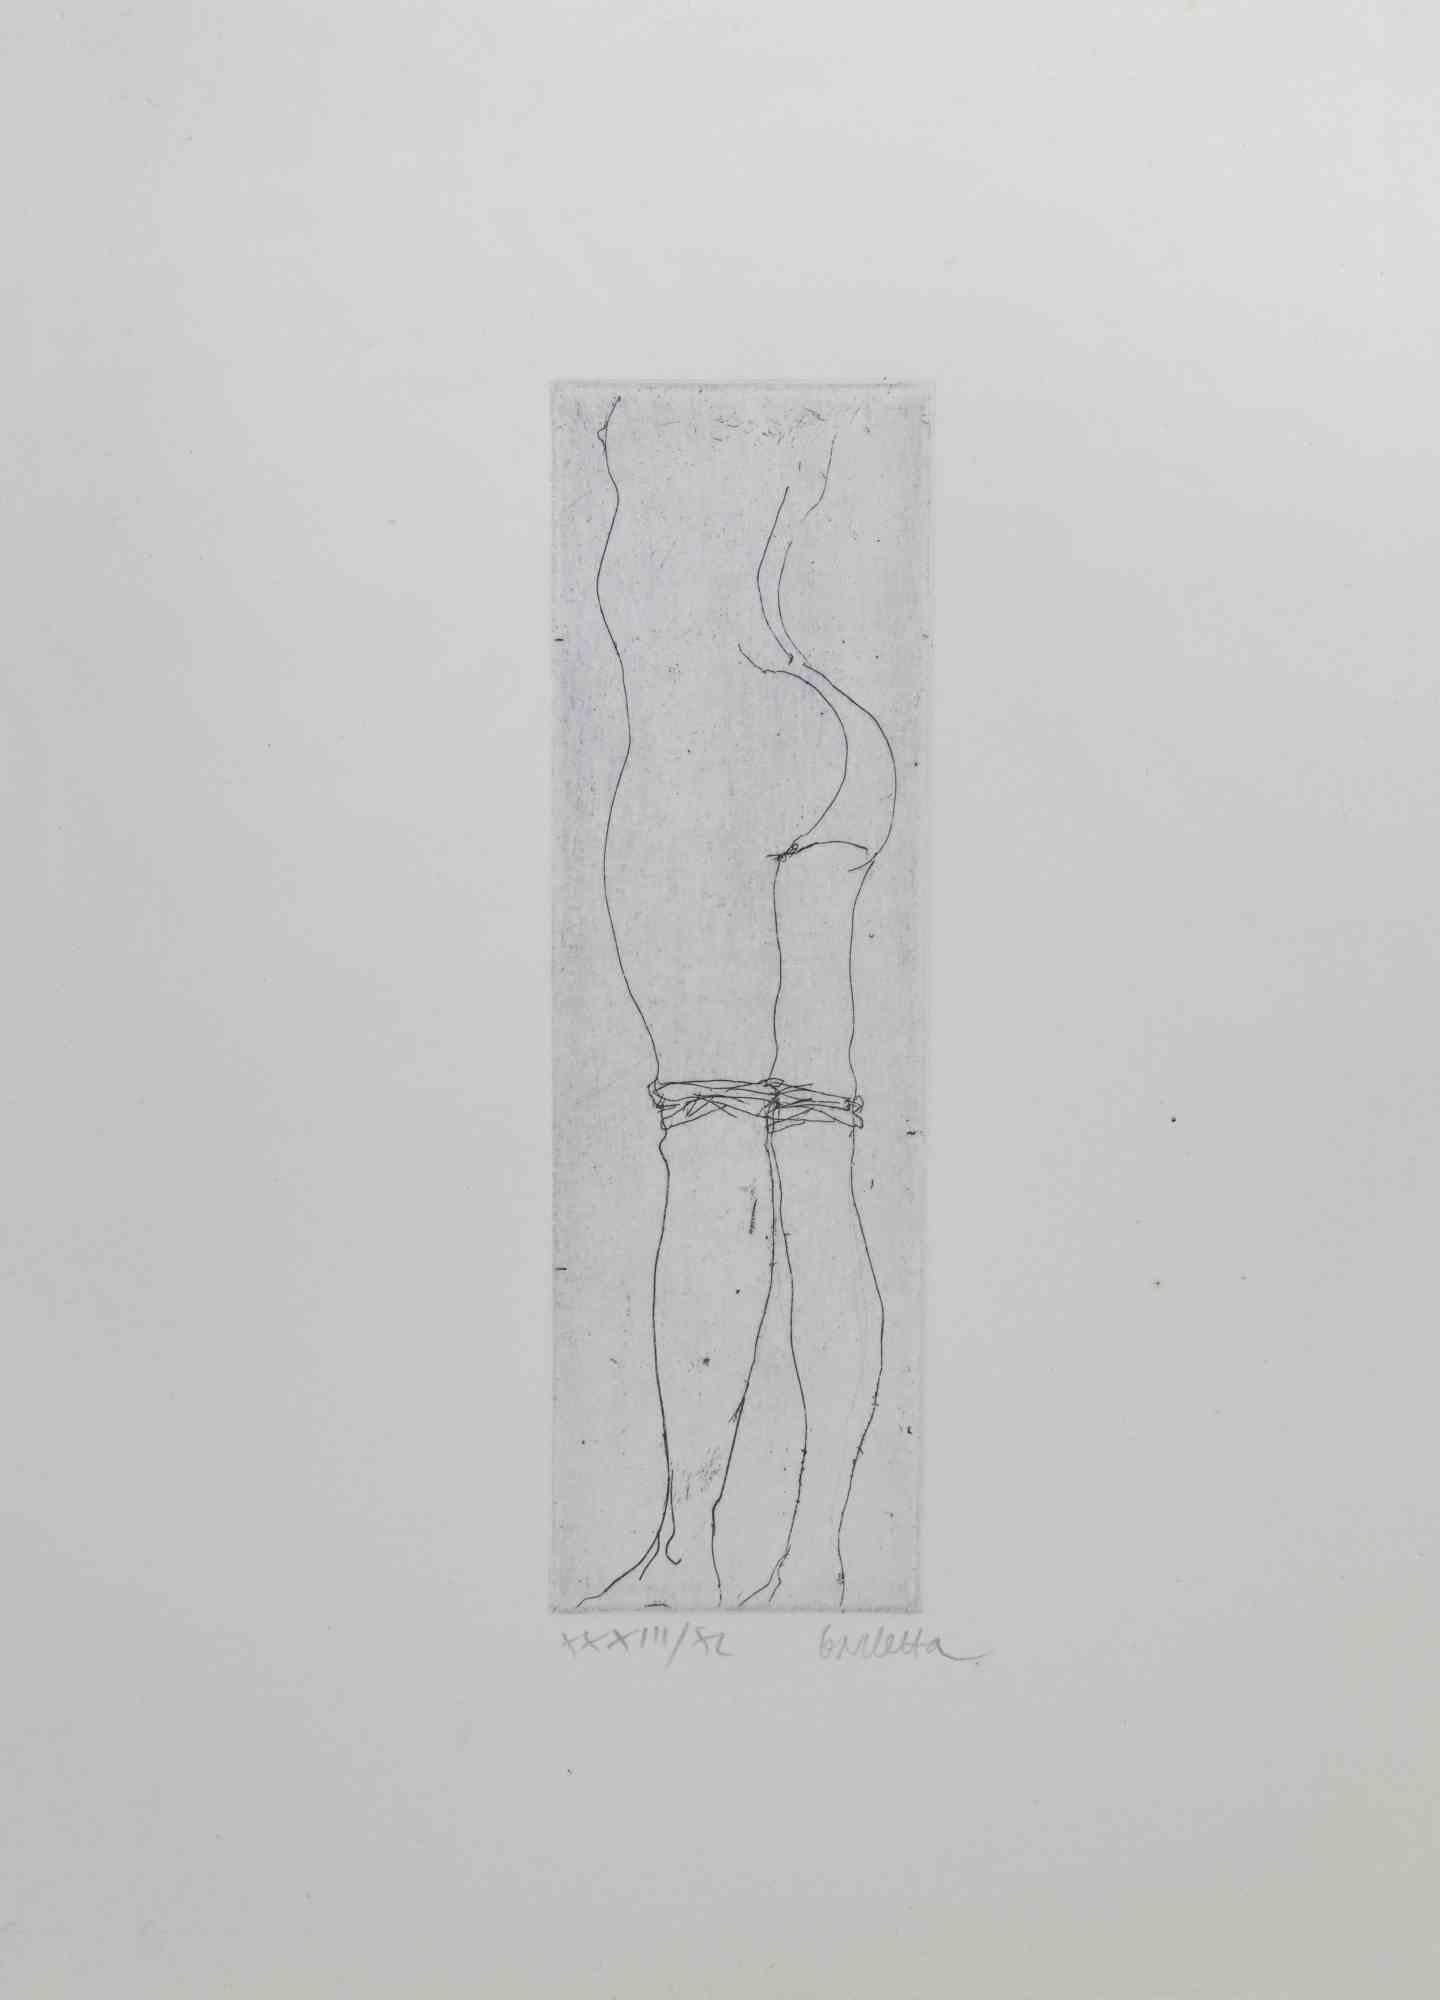 Nude is an etching on cardoboard realized by Sergio Barletta in 1974. 

sheet dimensions, 25 x 17 cm.

Handsigned in pencil in the lower right margin.

Edition XXXIII/XL 

Good condtions